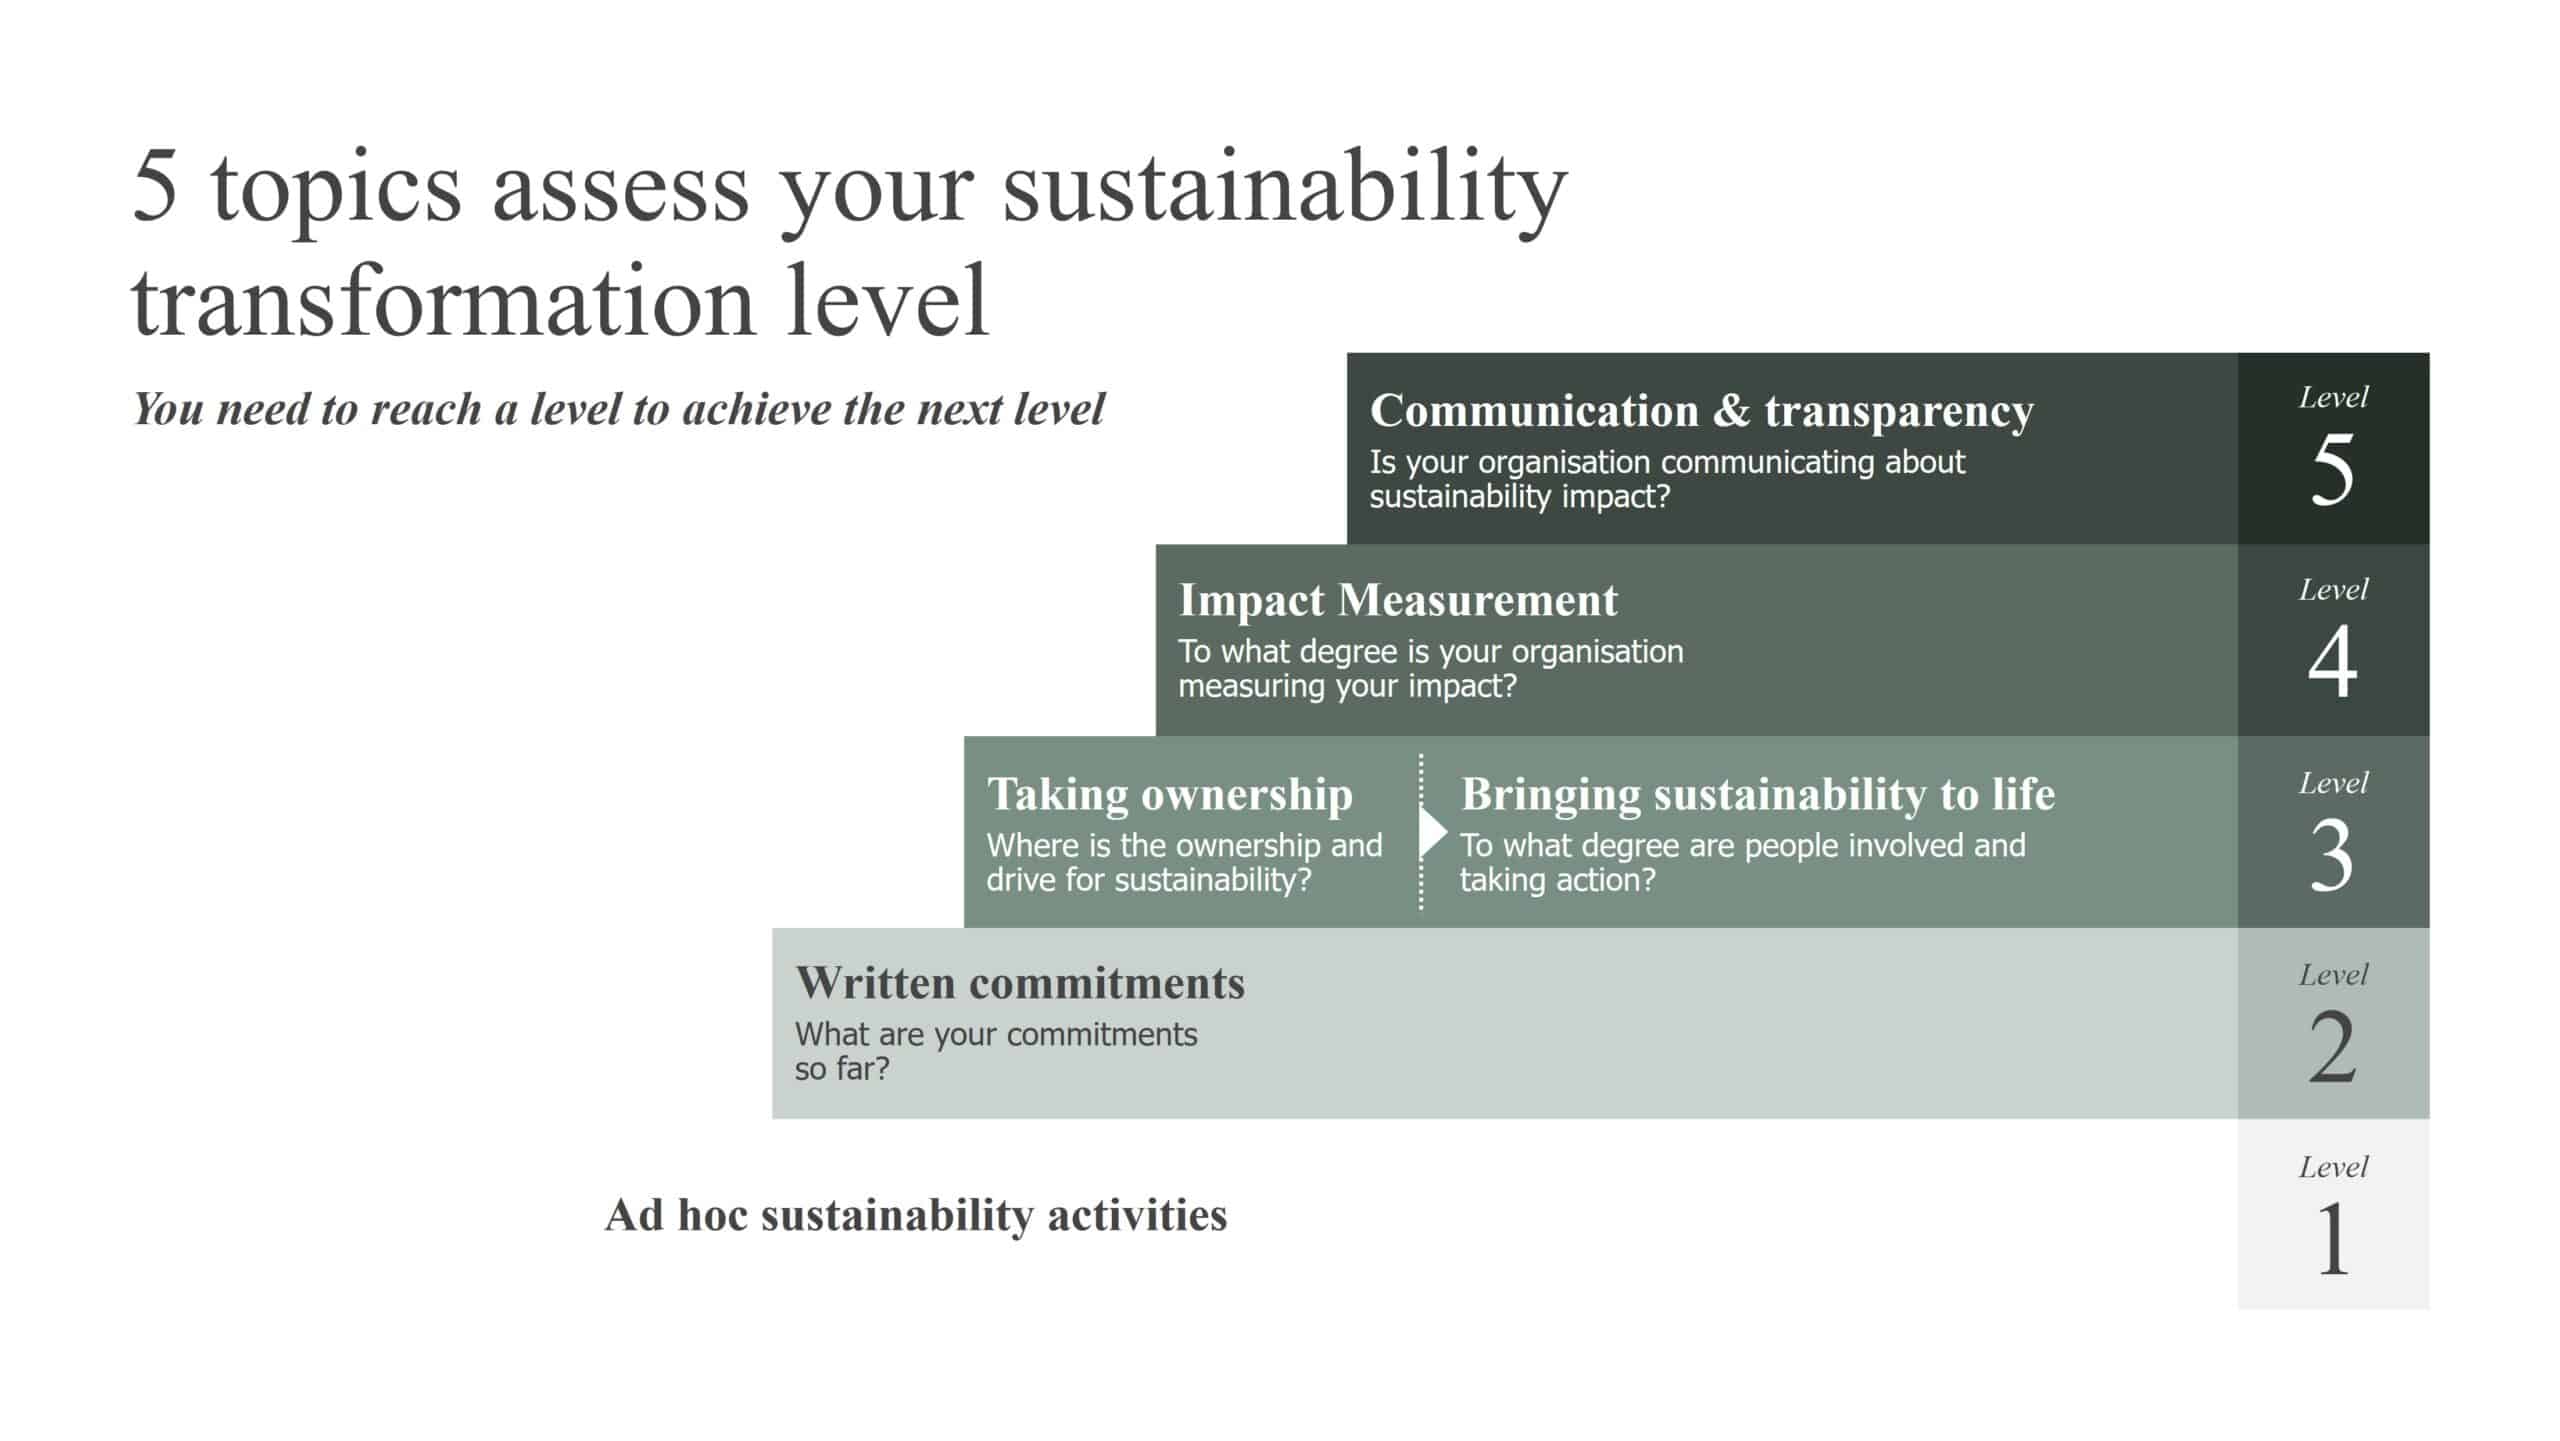 Figure 1: Overview of Mannaz Sustainability Transformation Index